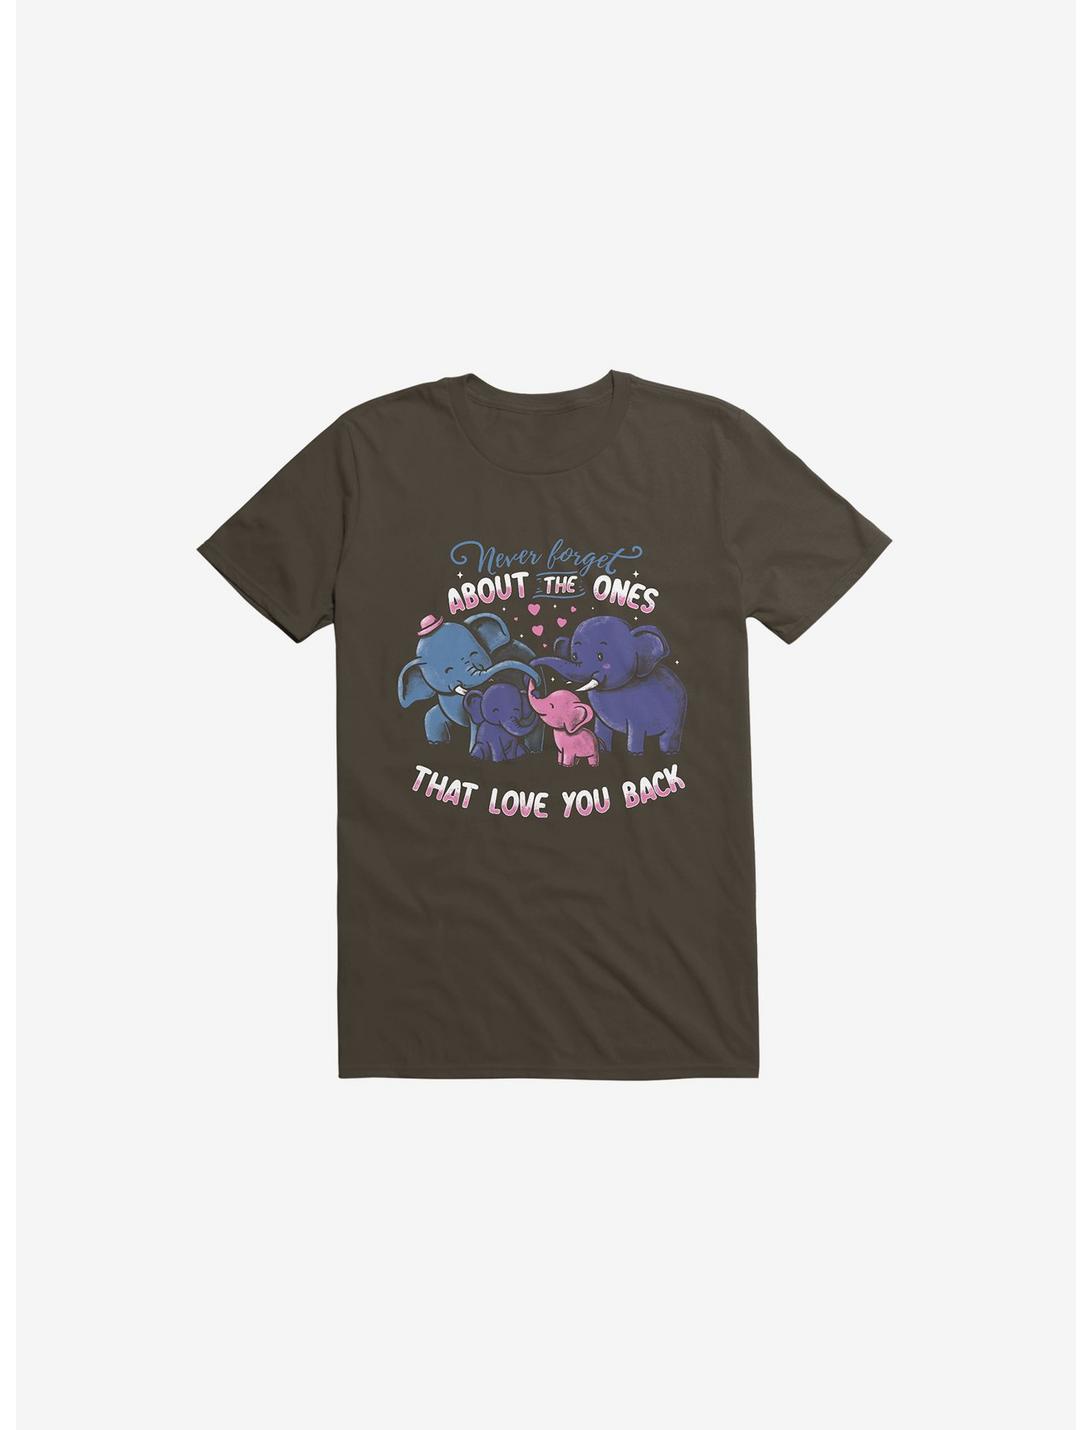 Never Forget About The Ones That Love You Back T-Shirt, BROWN, hi-res